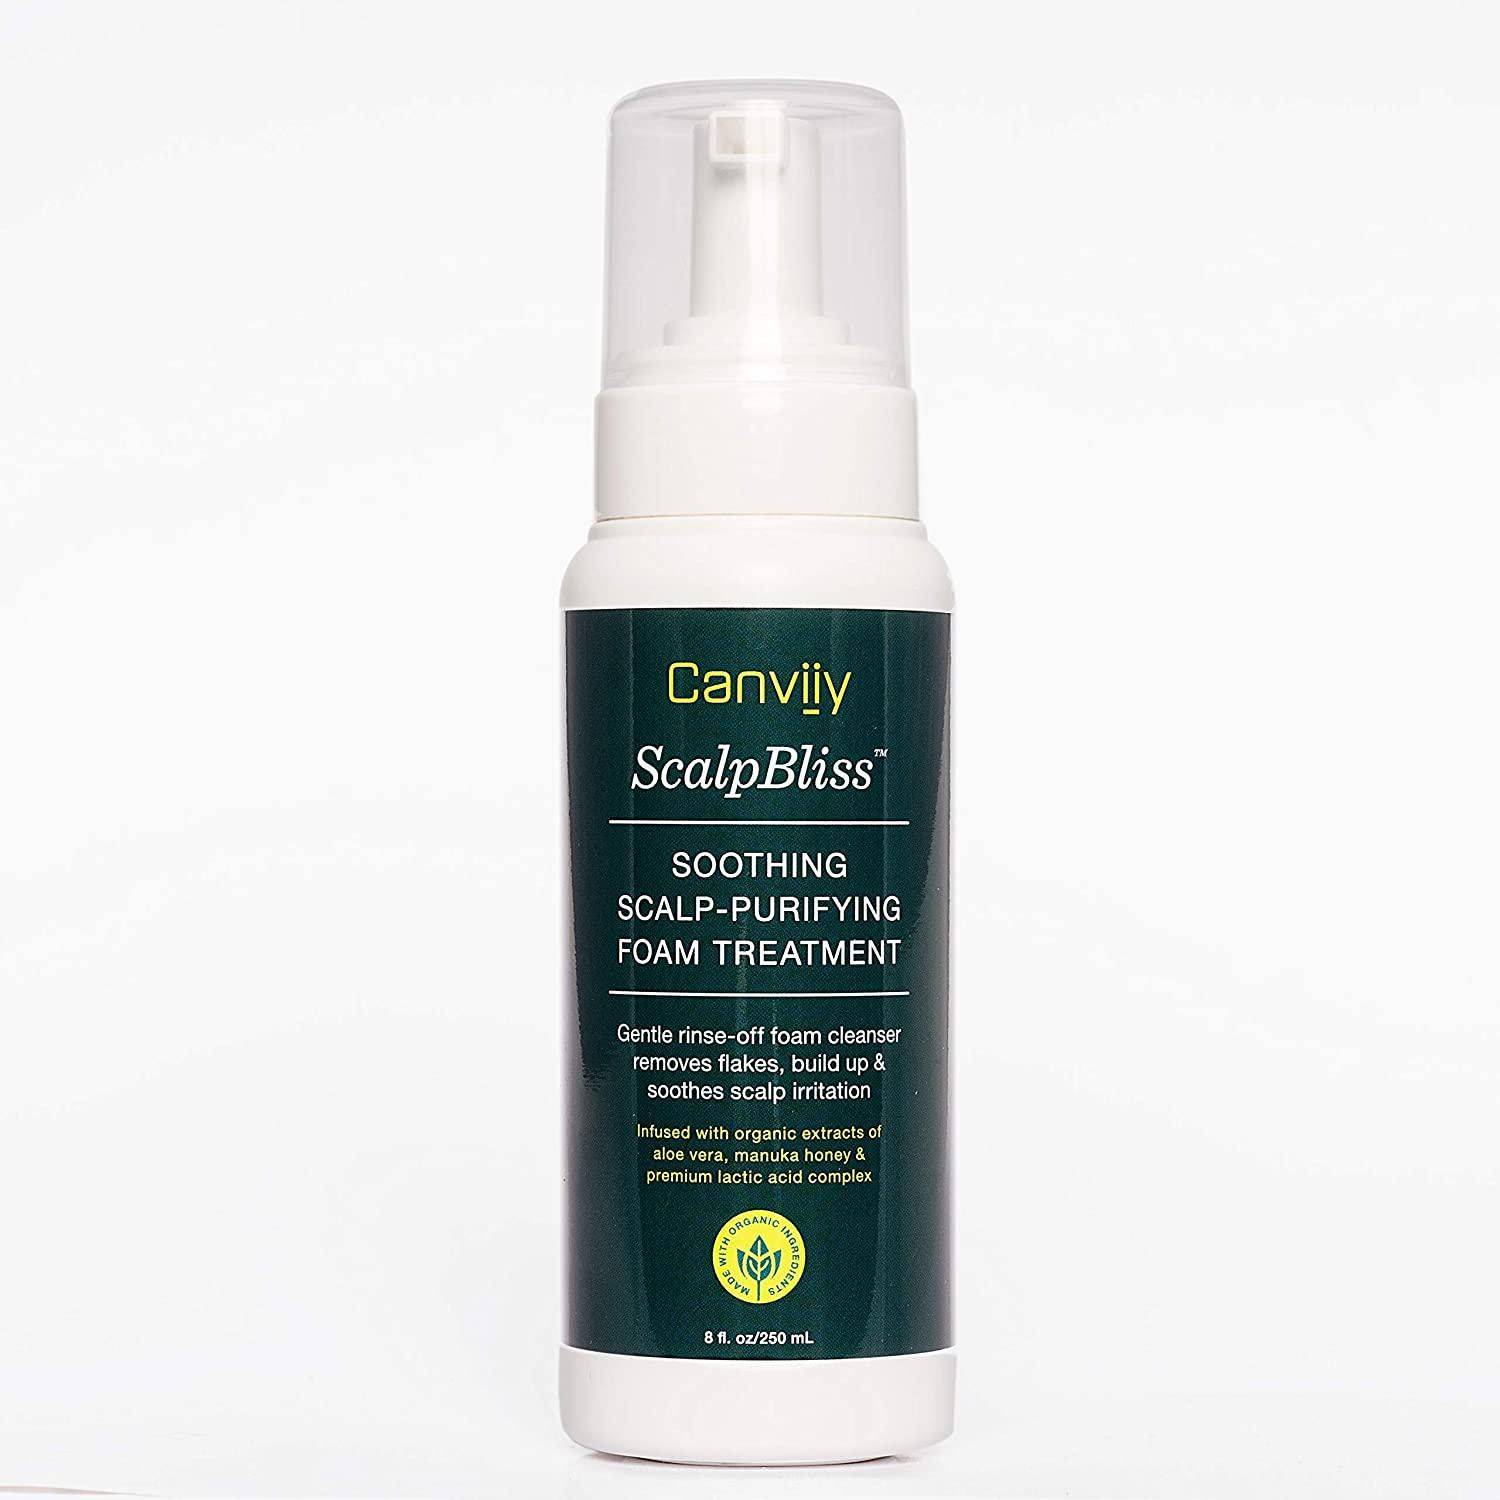 ScalpBliss Soothing Scalp Purifying Foam Treatment